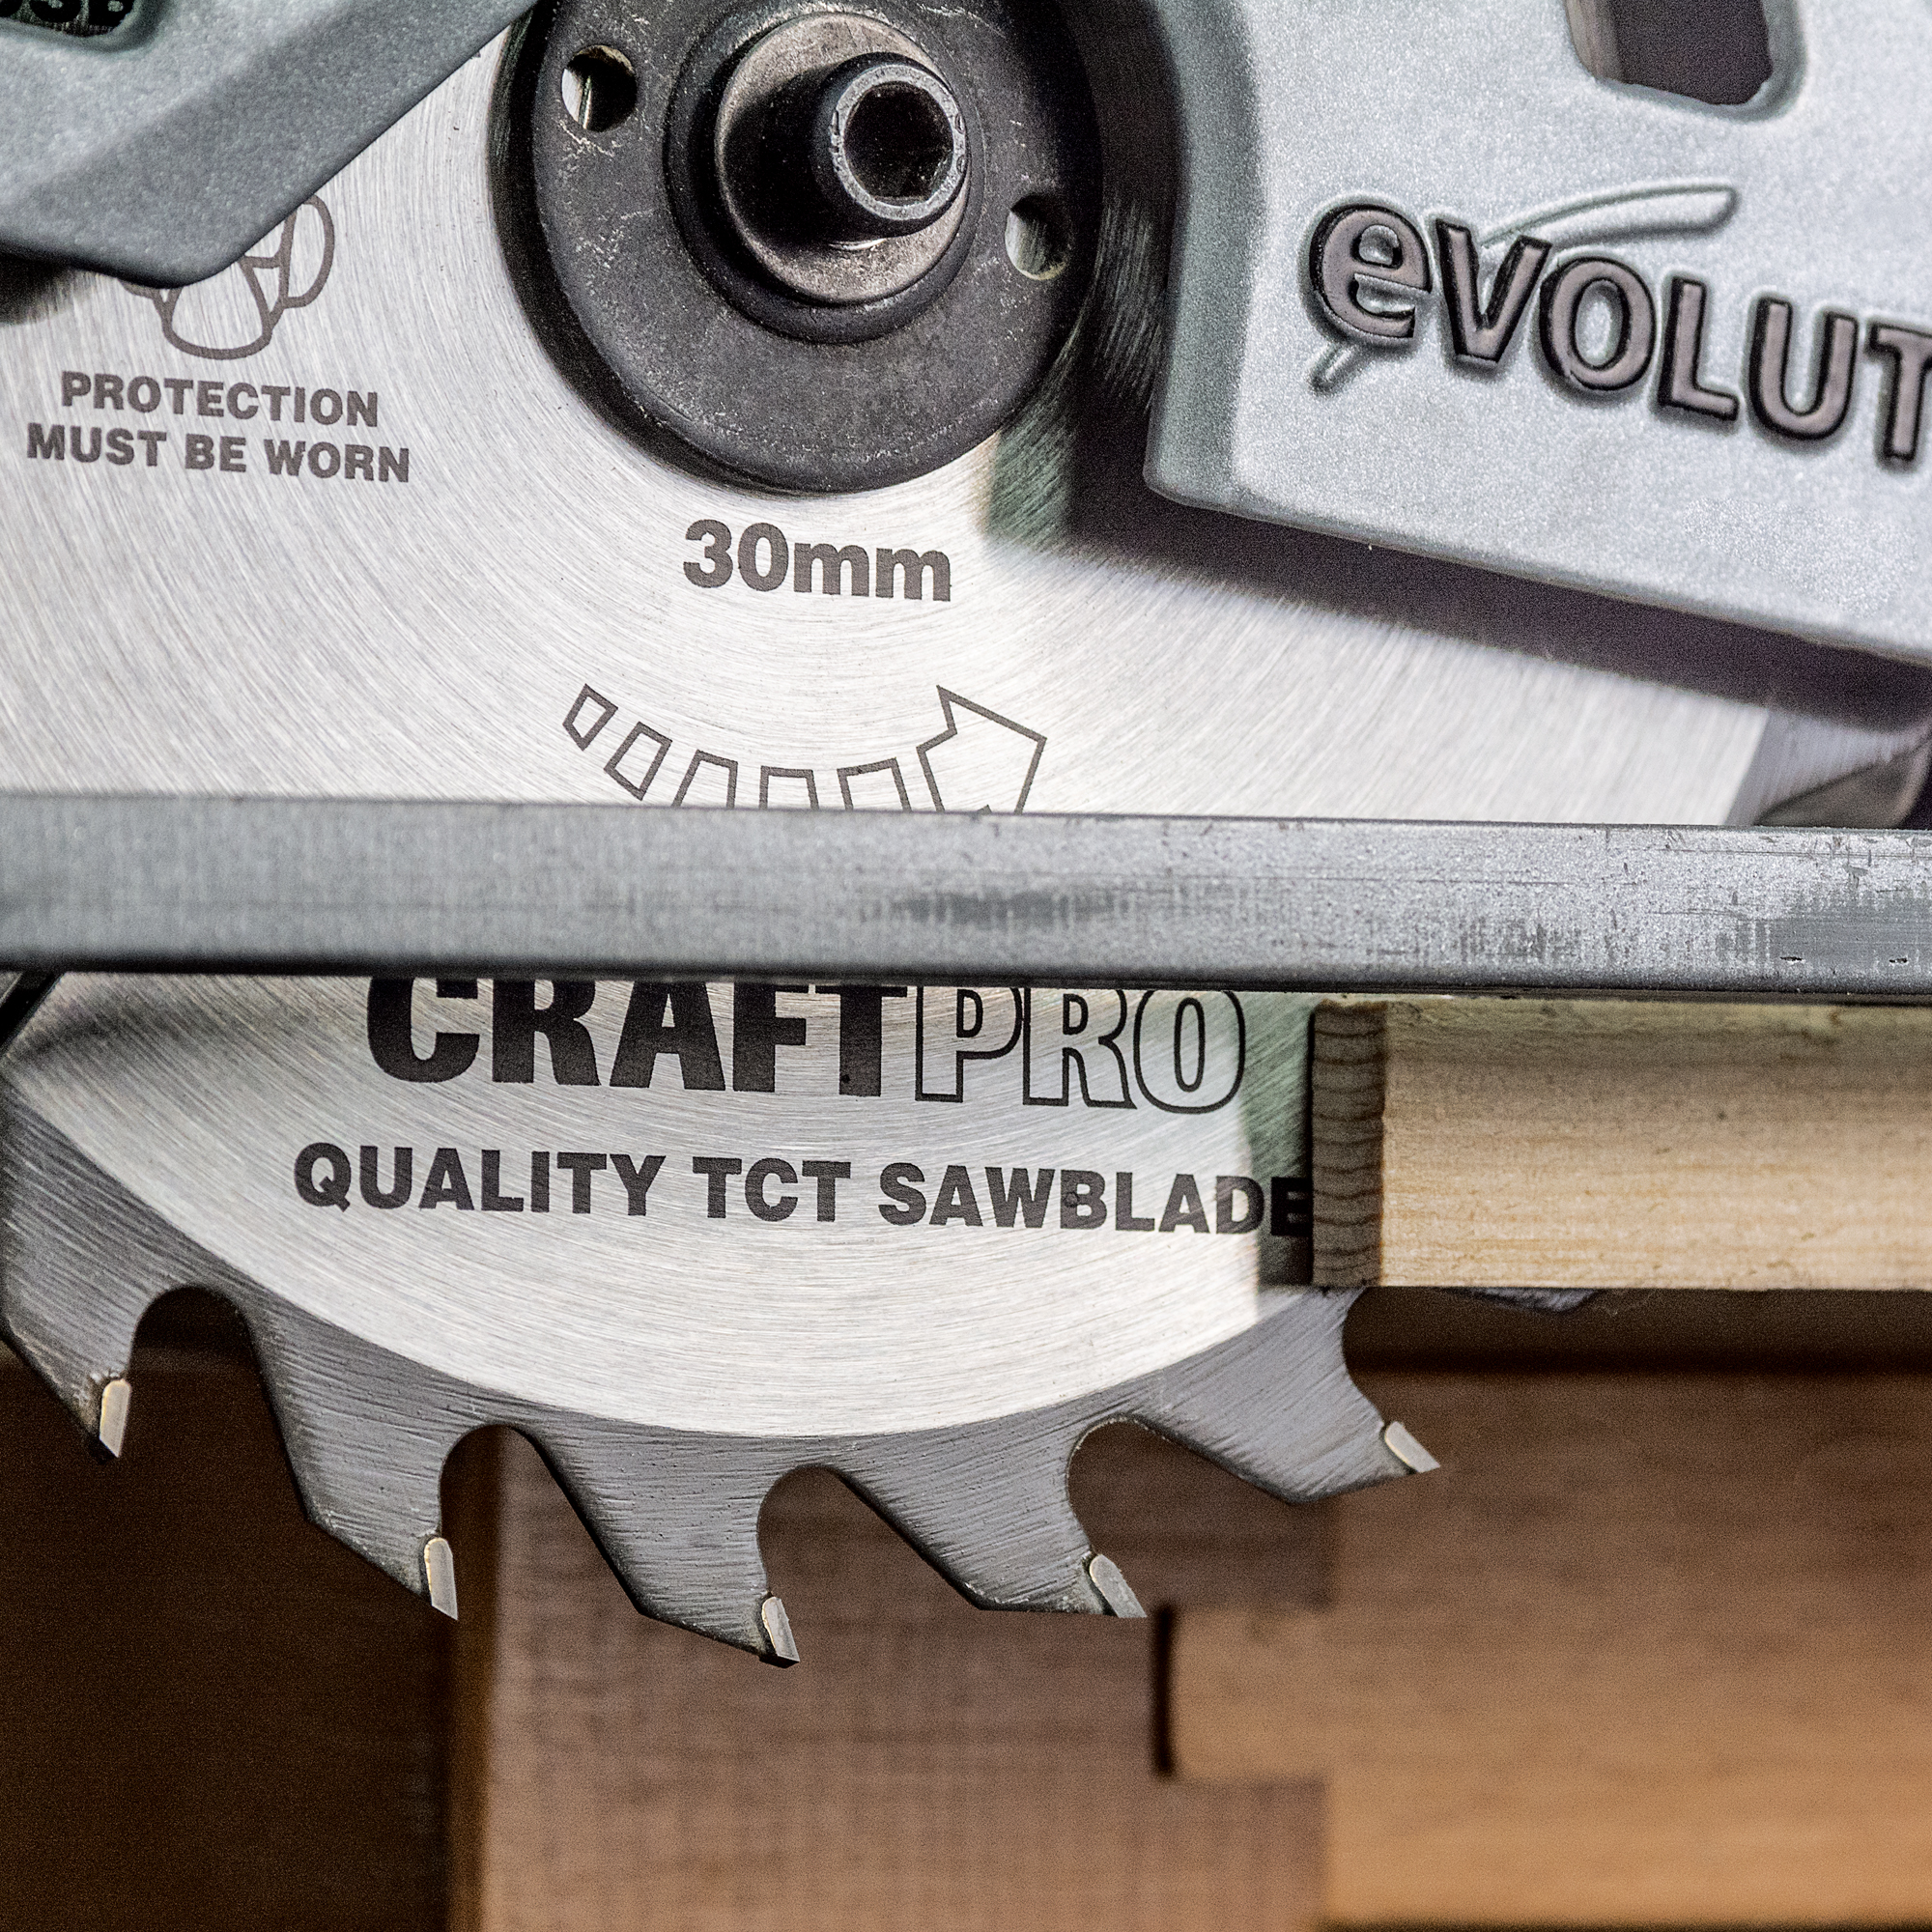 Replacement trend circular saw blades